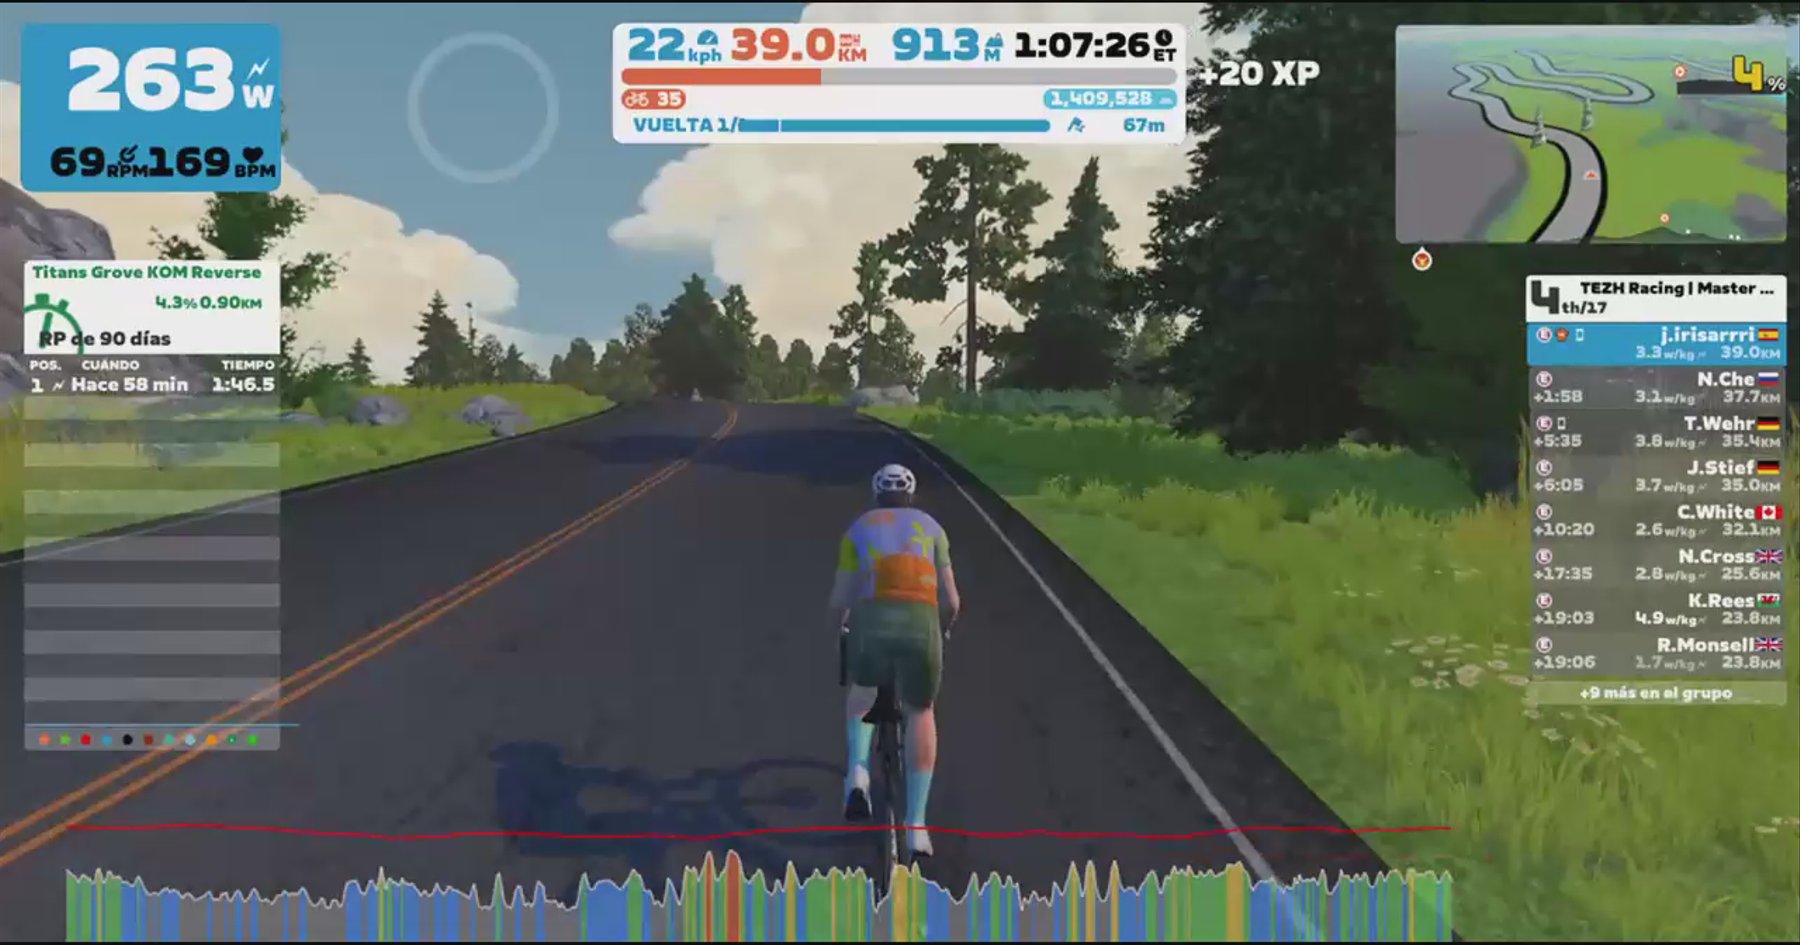 Zwift - Race: TEZH Racing | Master Open Race (E) on Muir And The Mountain in Watopia